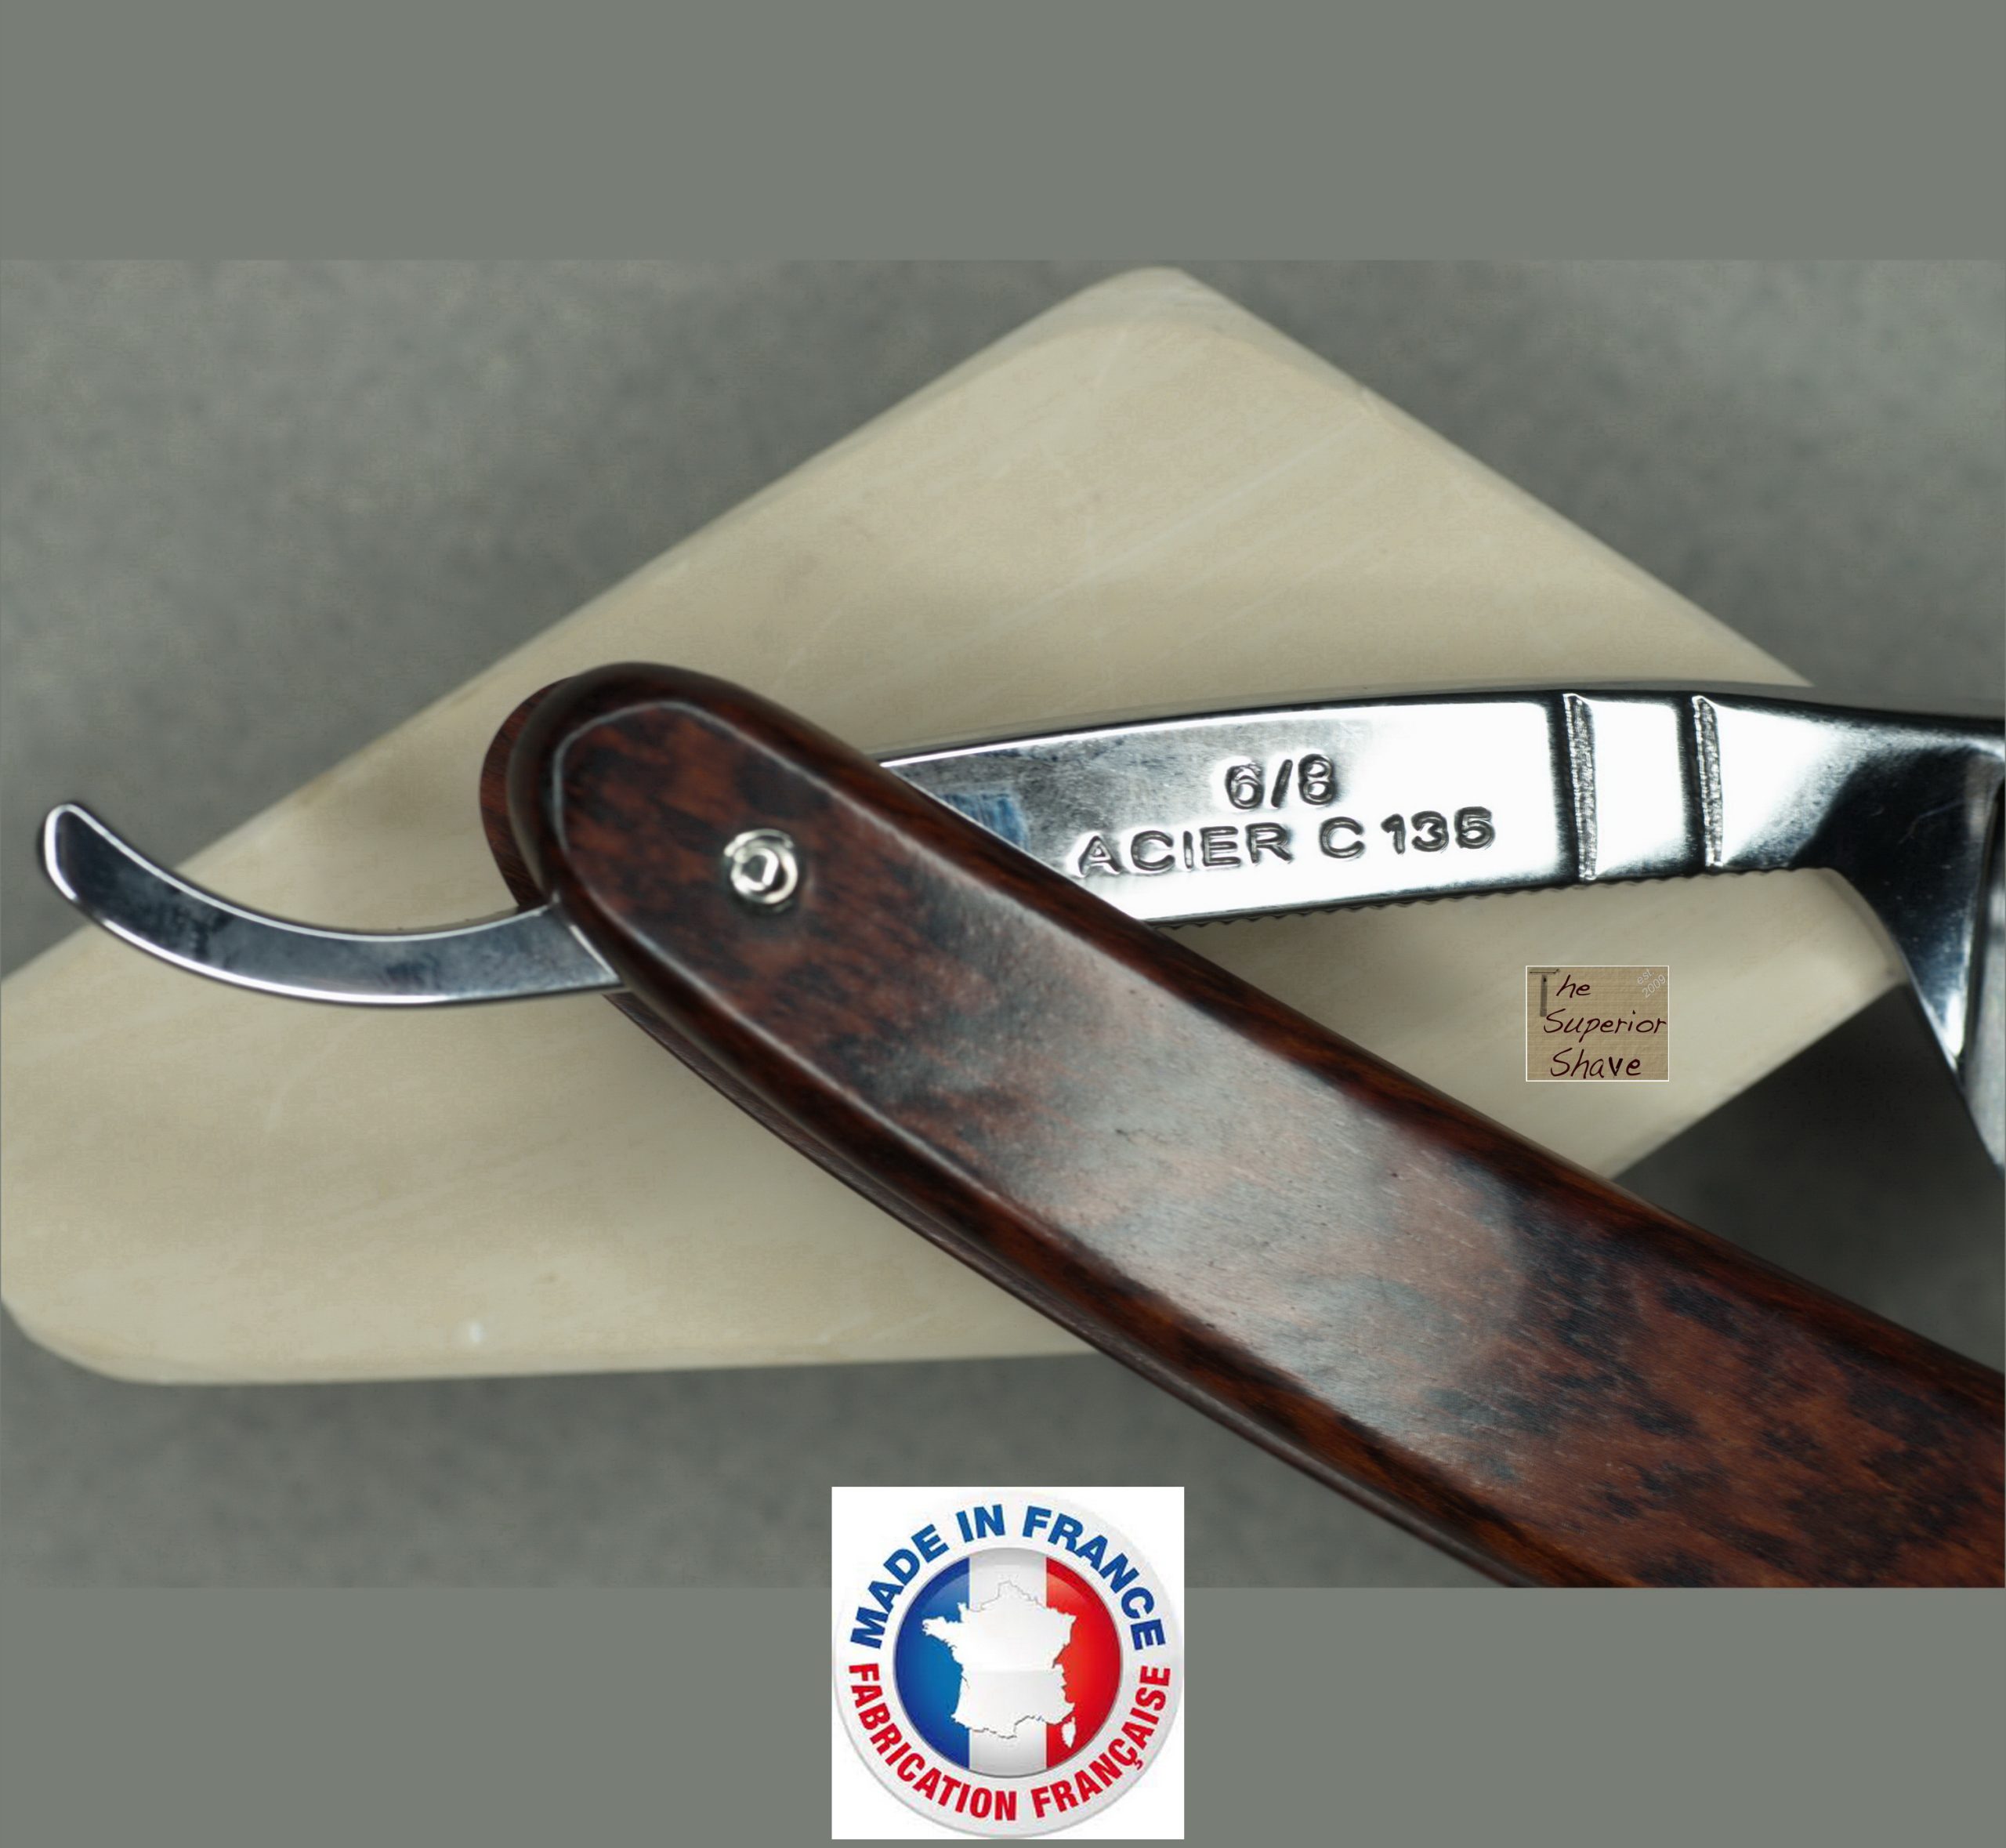 Neue Ware Thiers Issard | 275 | Steel Straight in Size Shave Superior Ground The Razor French Made – | Le | Point Grelot Full Round Hollow | Snakewood 6/8 | Handle Carbon France